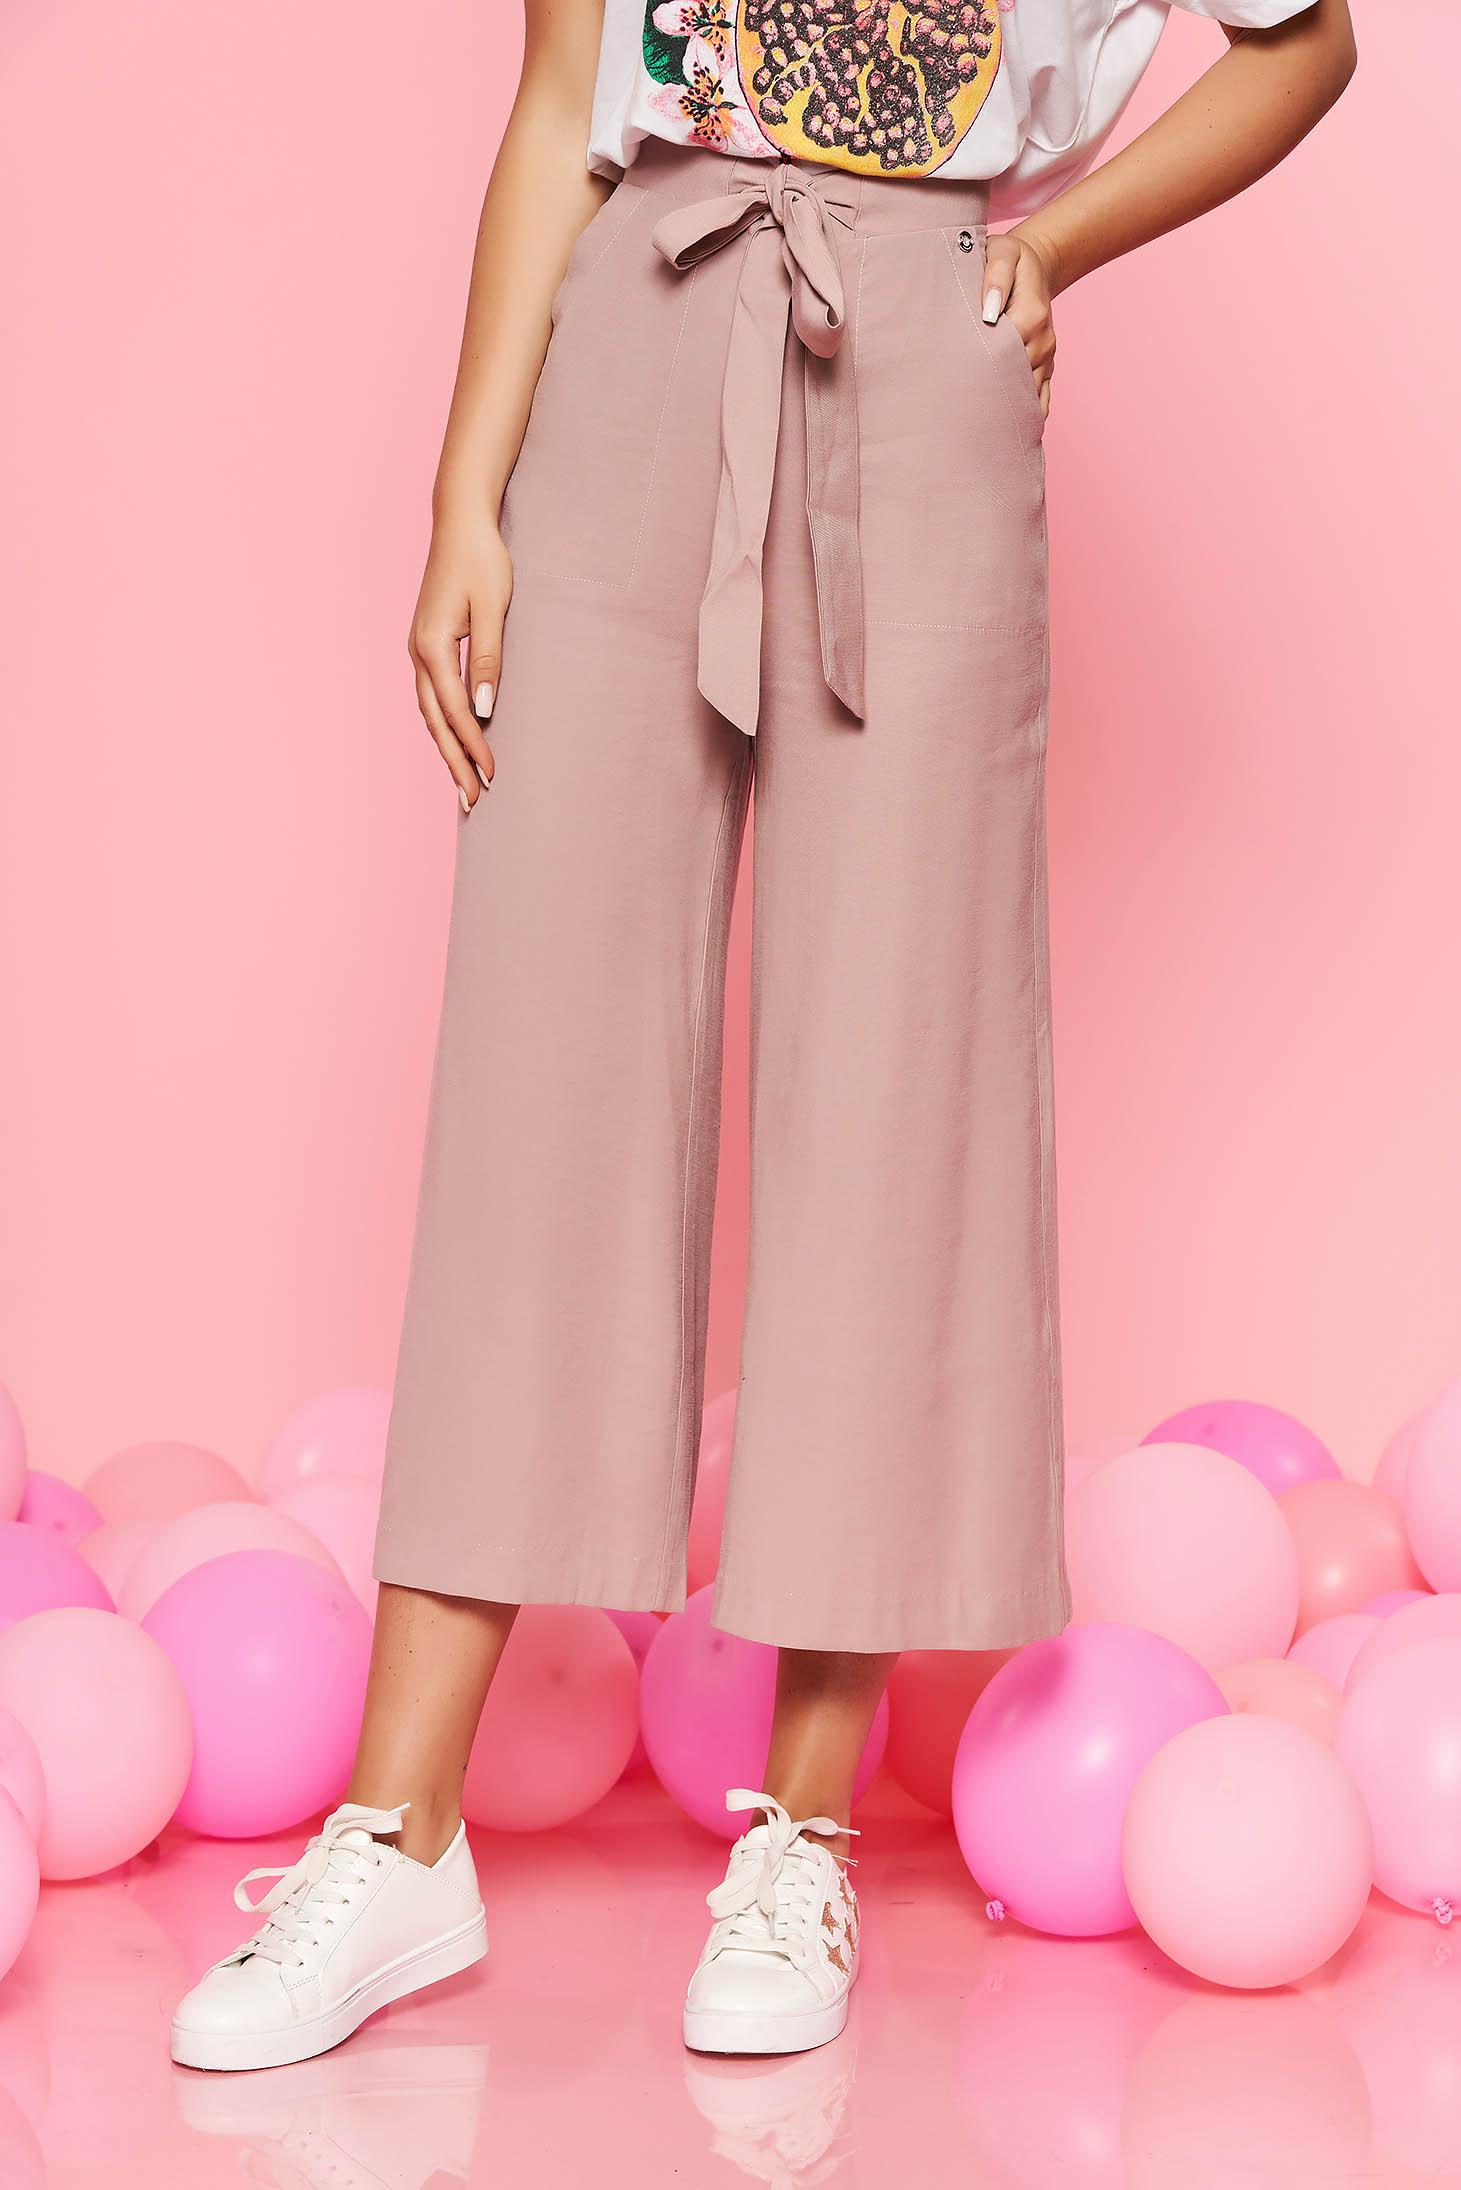 Top Secret rosa casual trousers flaring cut high waisted accessorized with tied waistband airy fabric